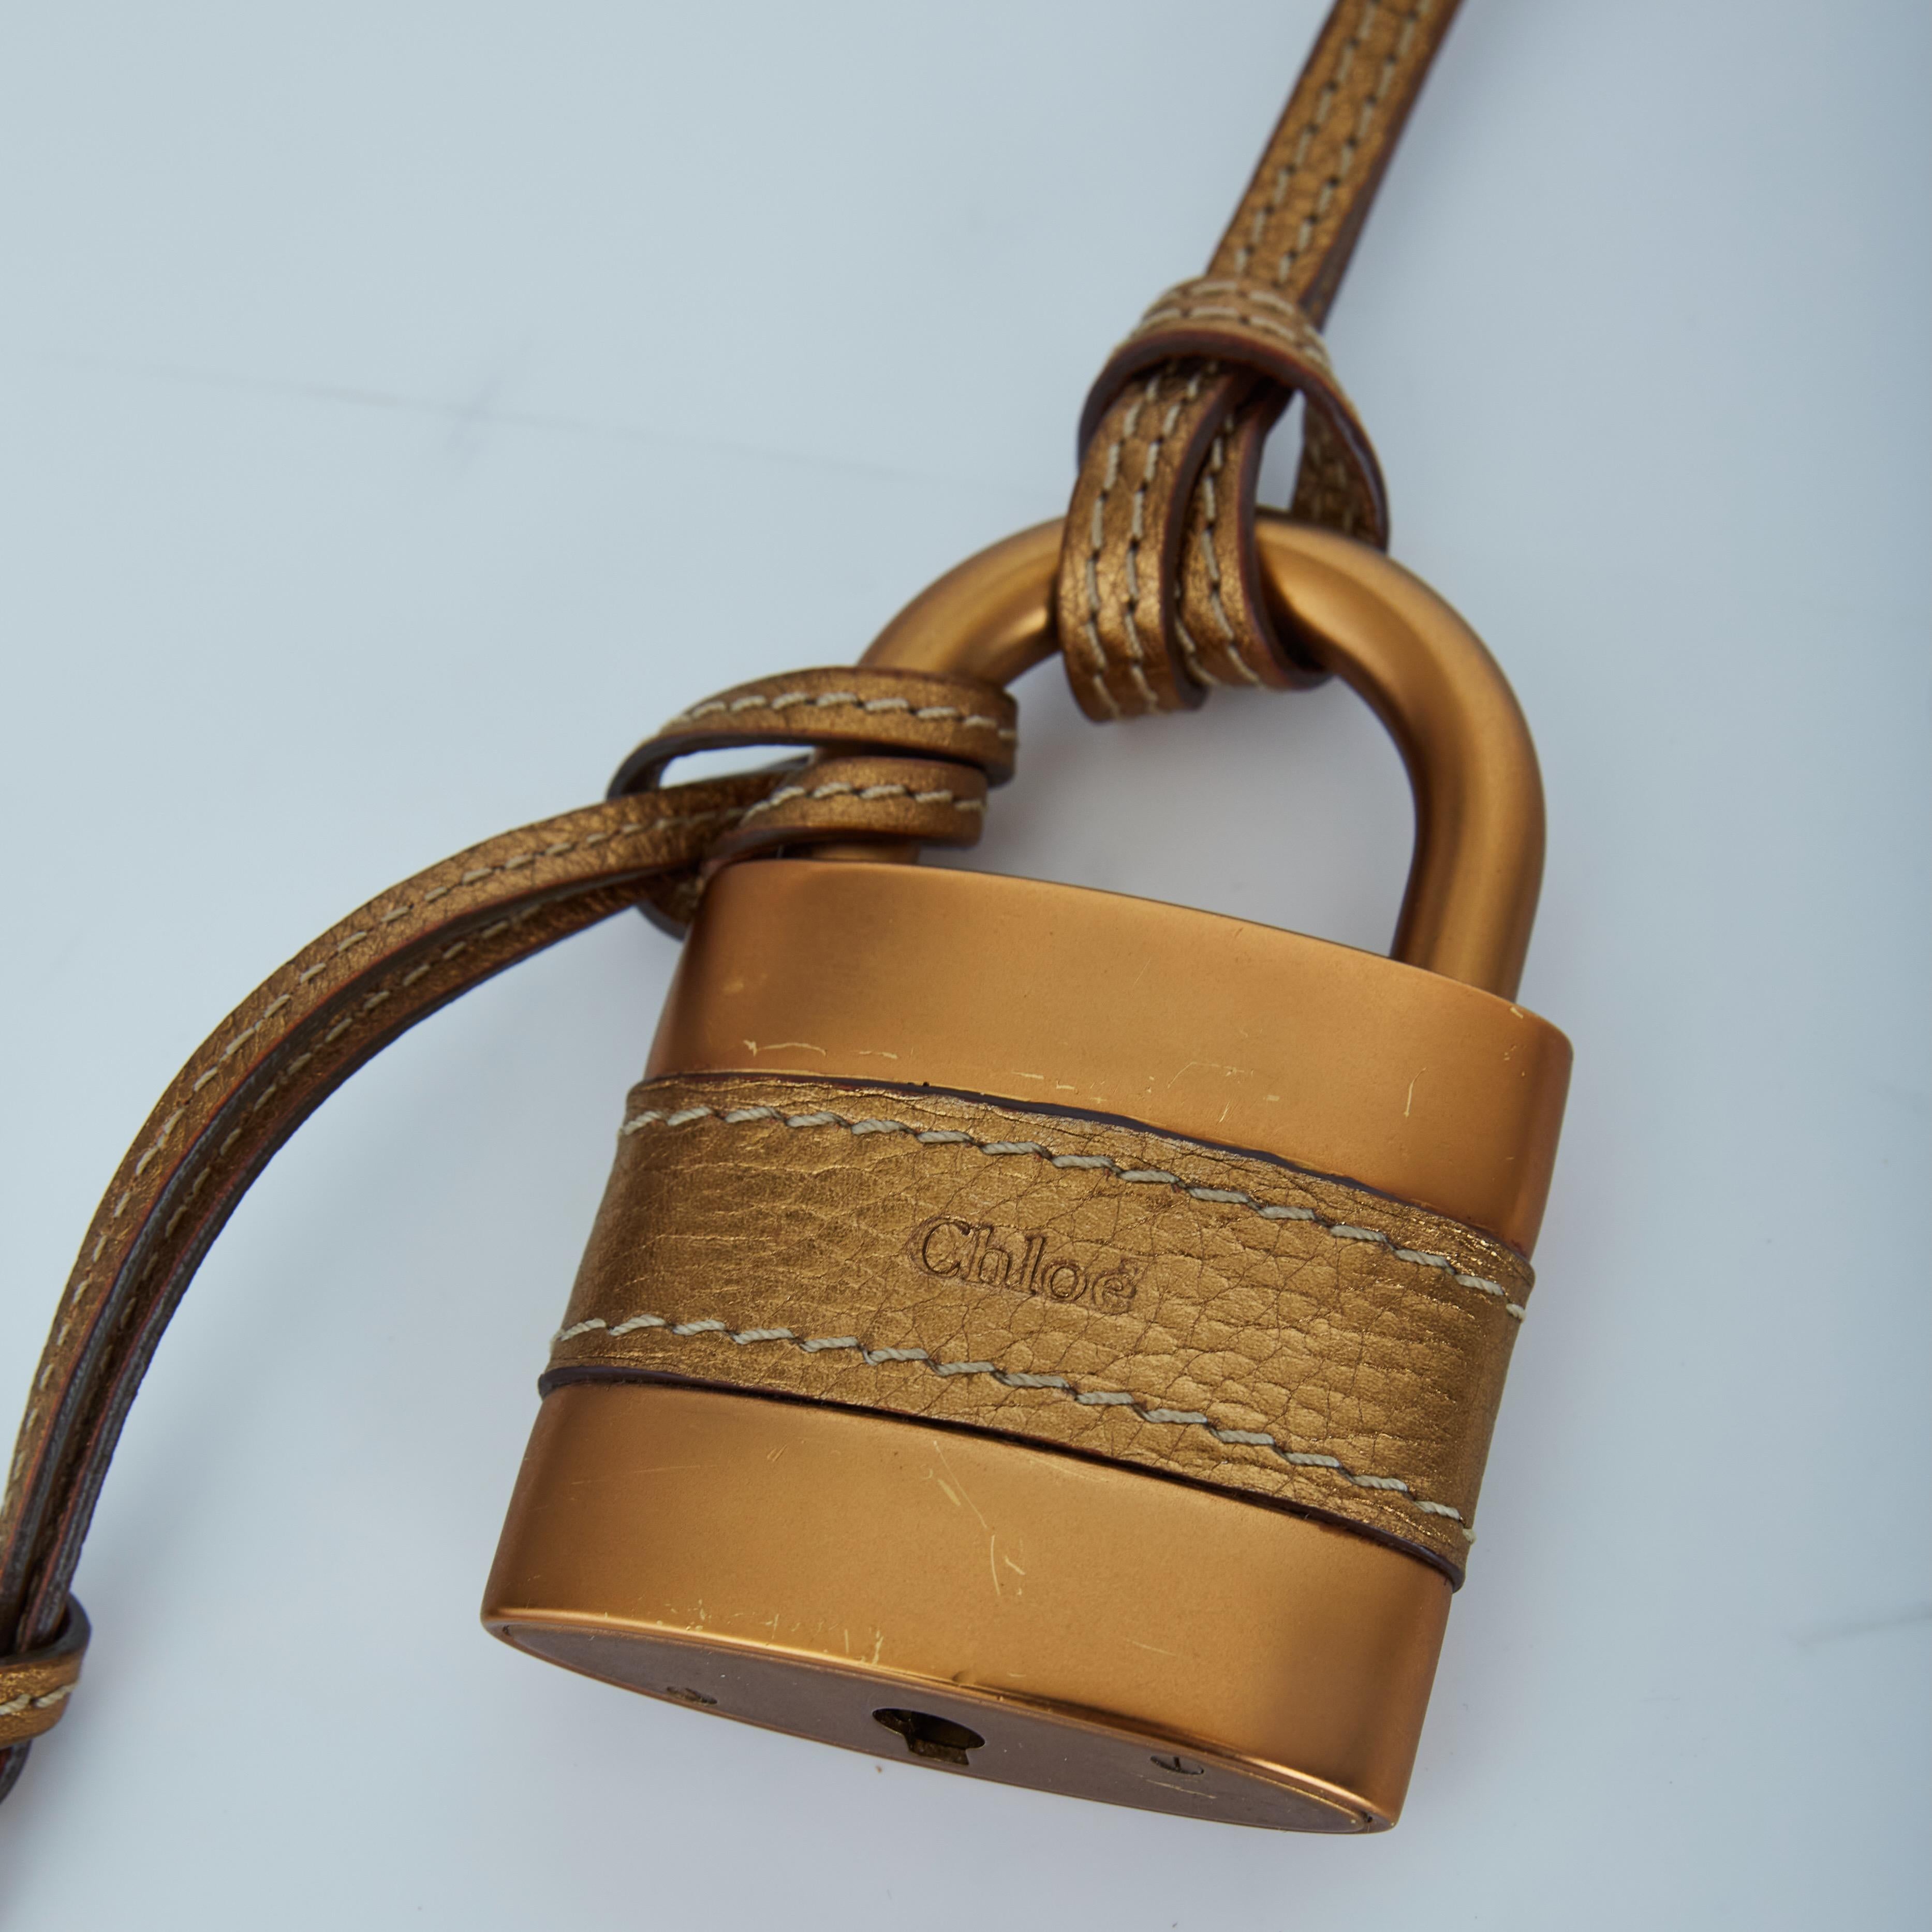 Color: Gold tone
Material: Metal and leather
Measurements: Length 2” x Width 3.5” (Padlock)
Comes with: Box
Condition: Very good: looks never used with faint hairline scratches throughout.